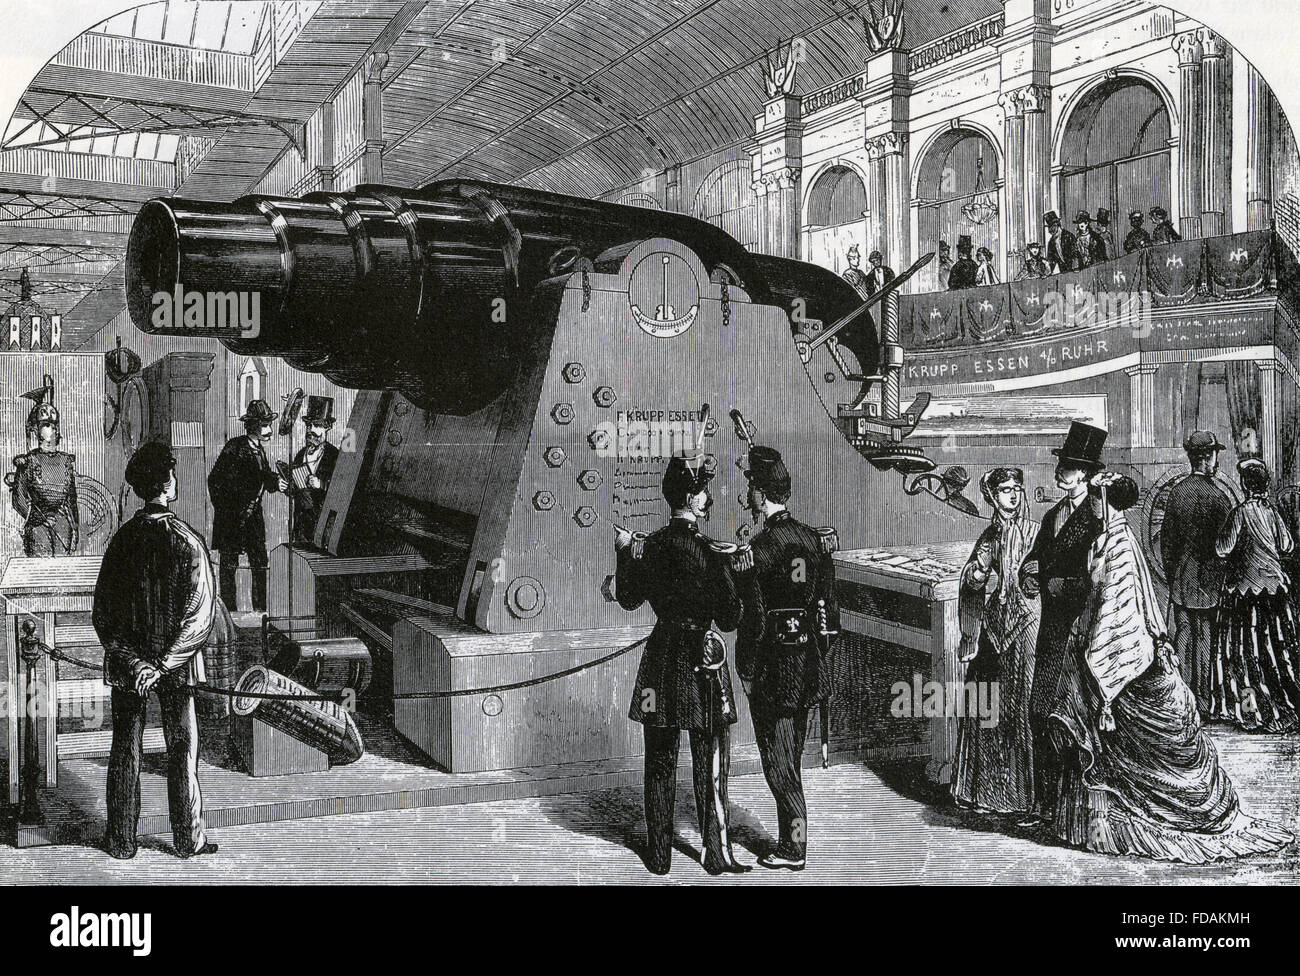 Krupp Cannon German Section Exposition Universalle Paris France Stereoview 1867 